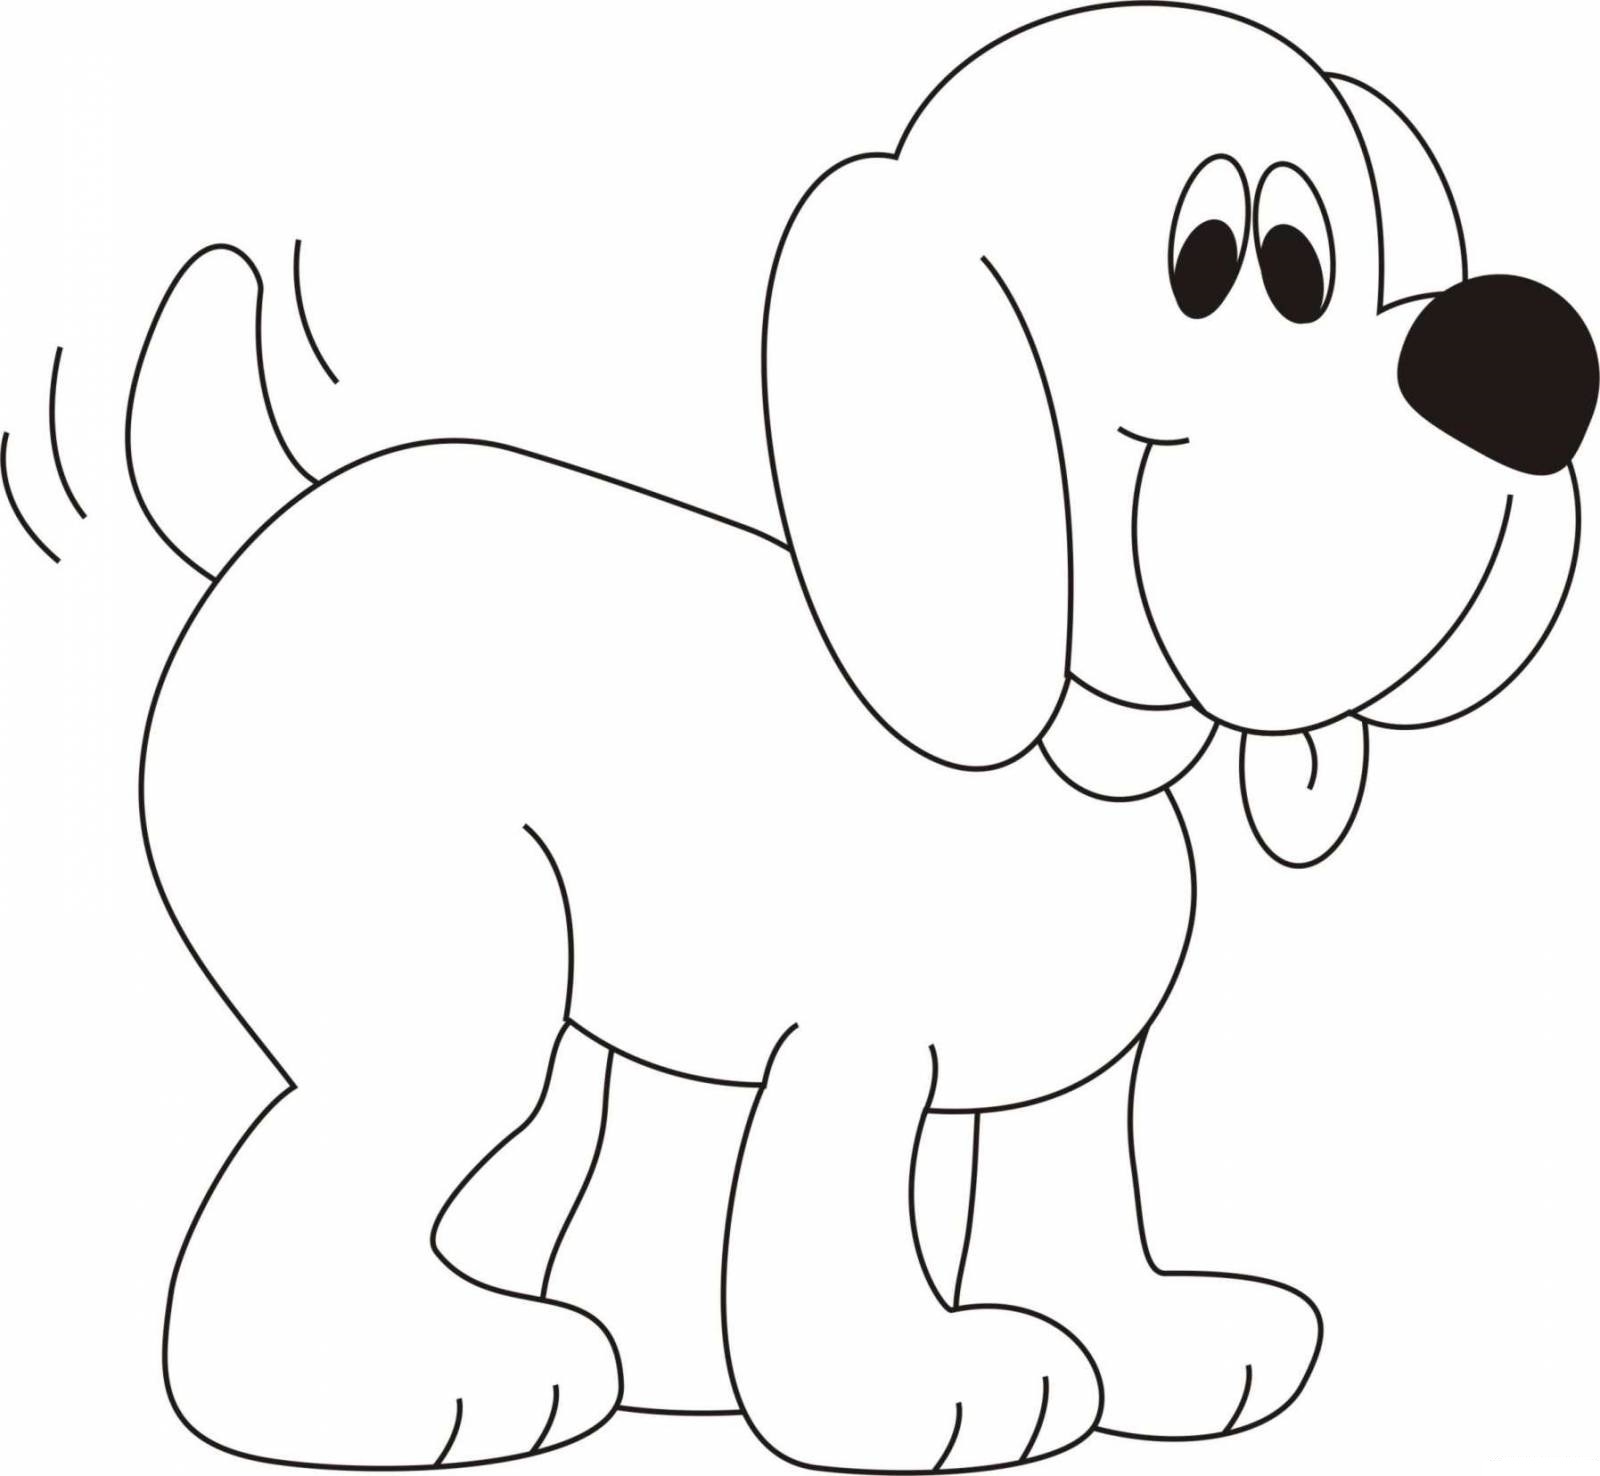 Dog Coloring Pages For Kids - Preschool and Kindergarten